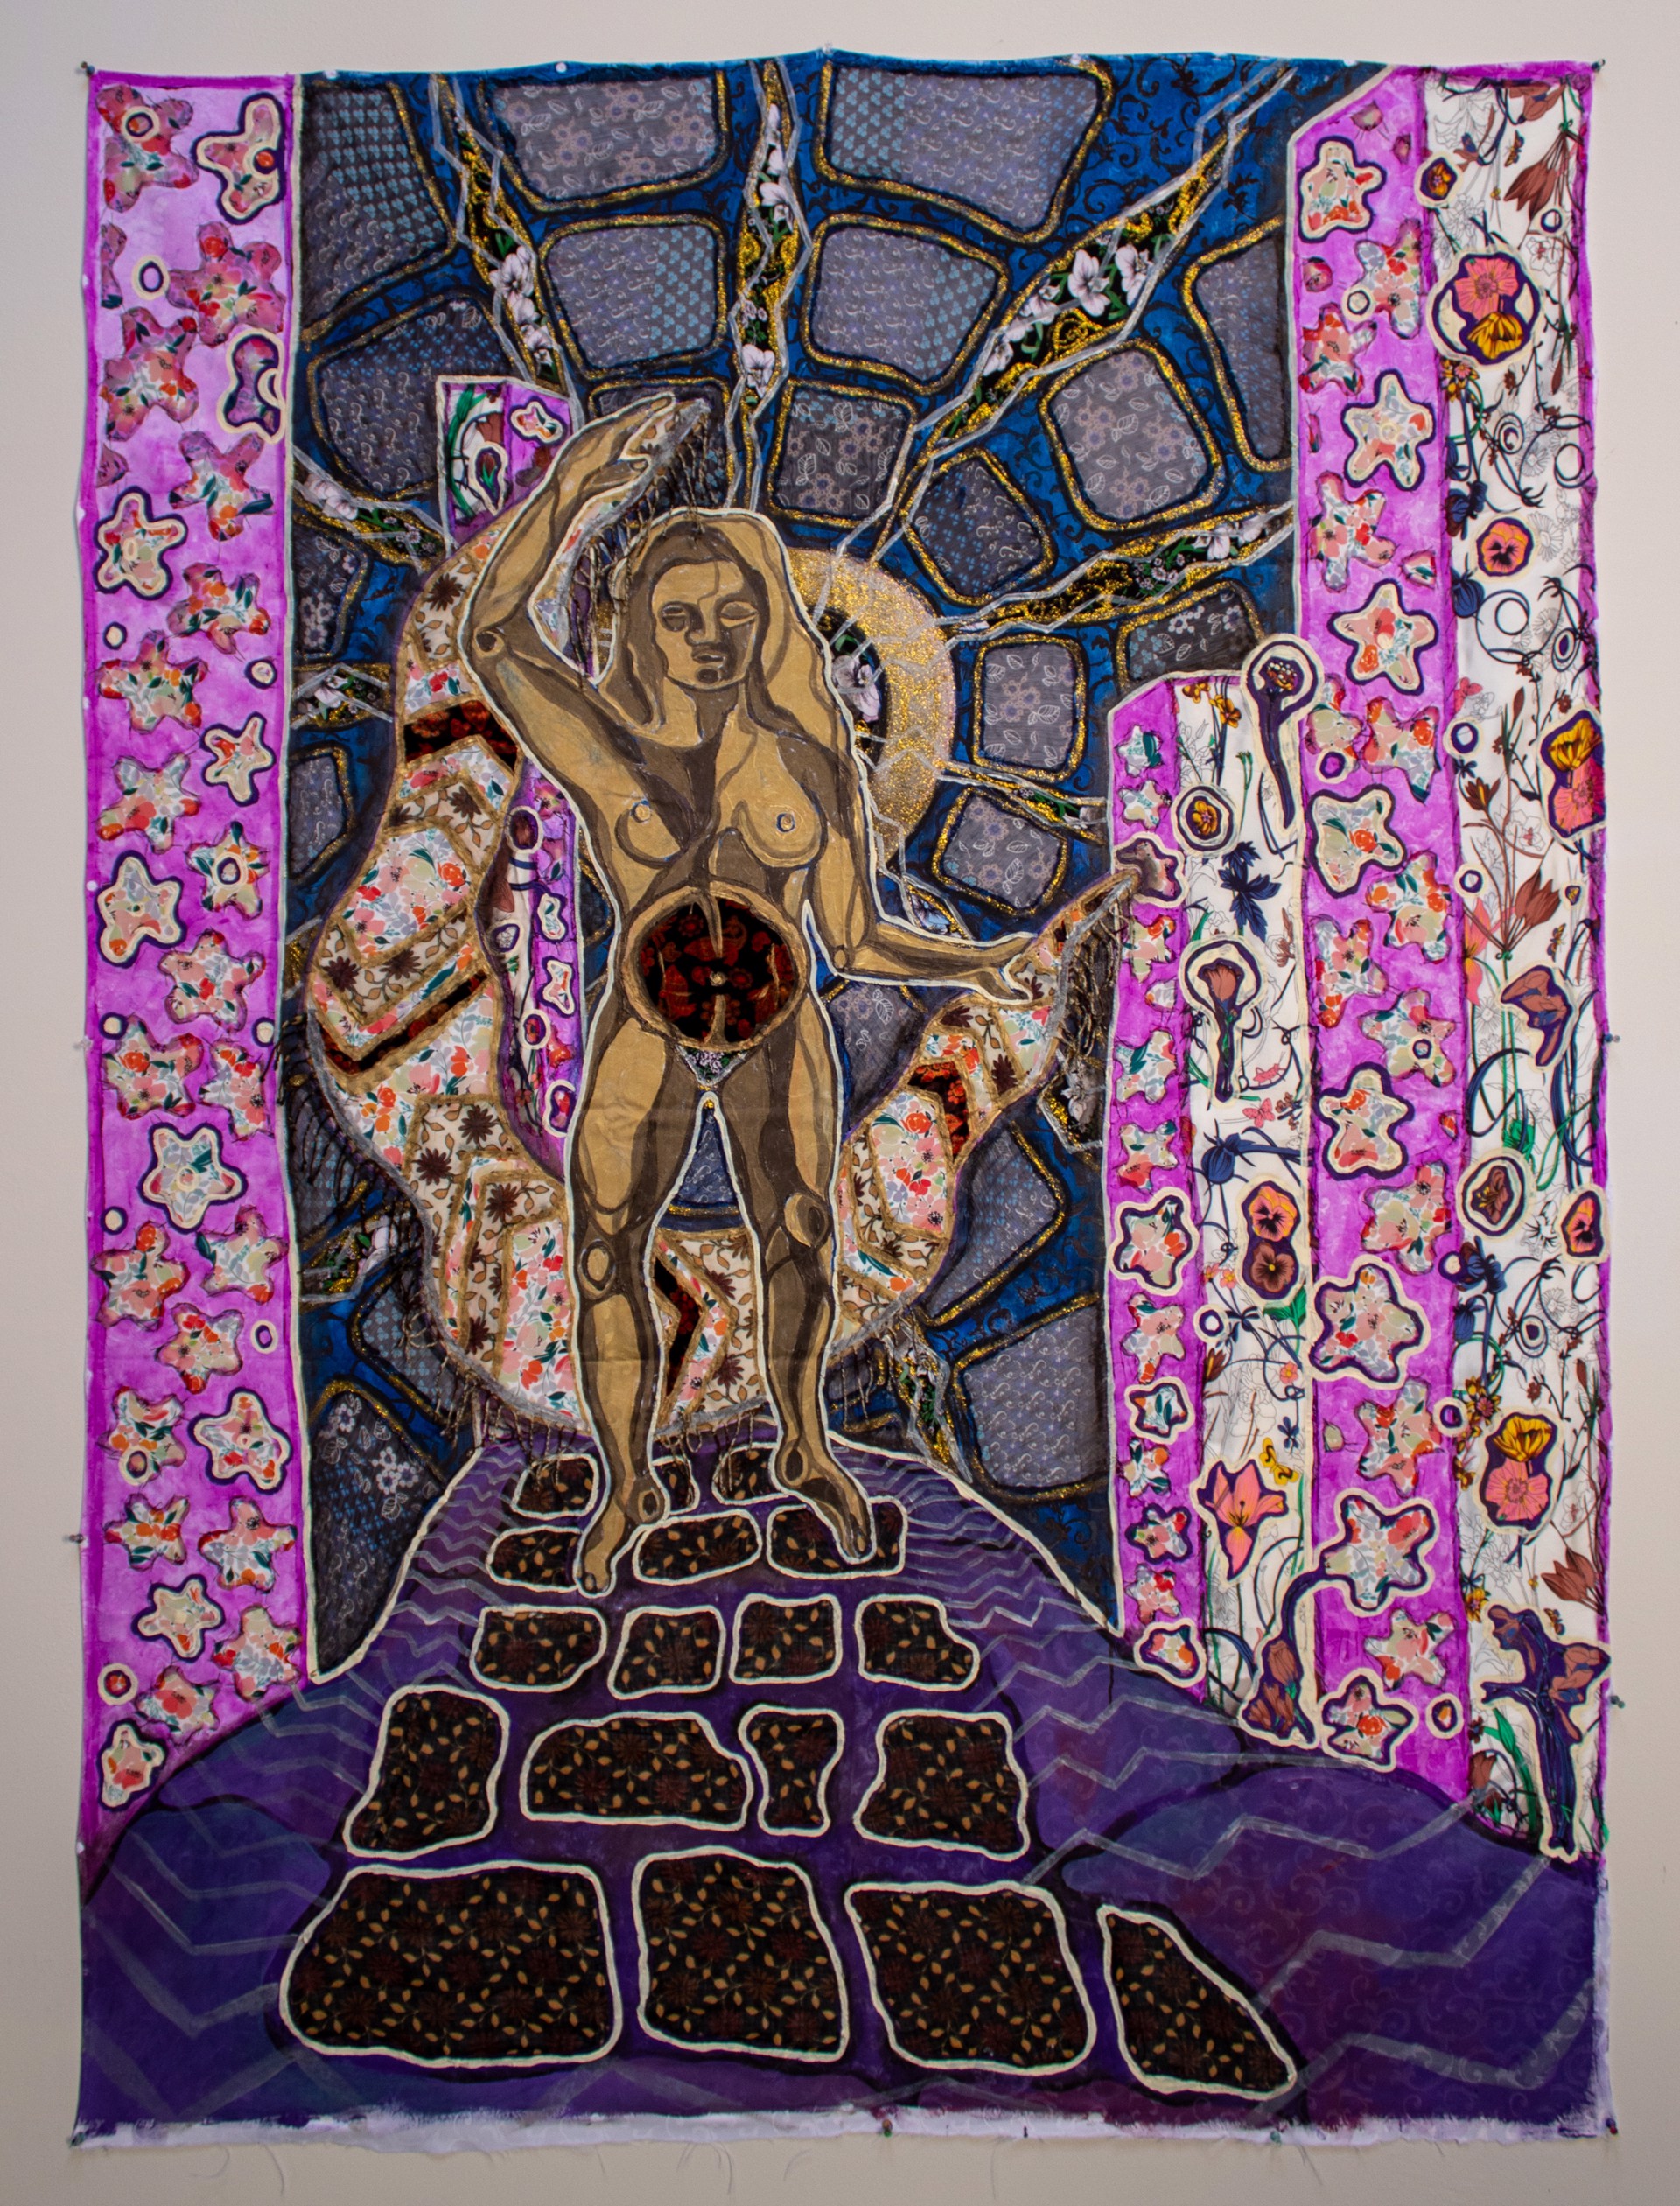 The Reawakening of the Fertility Goddess by Laurie Shapiro